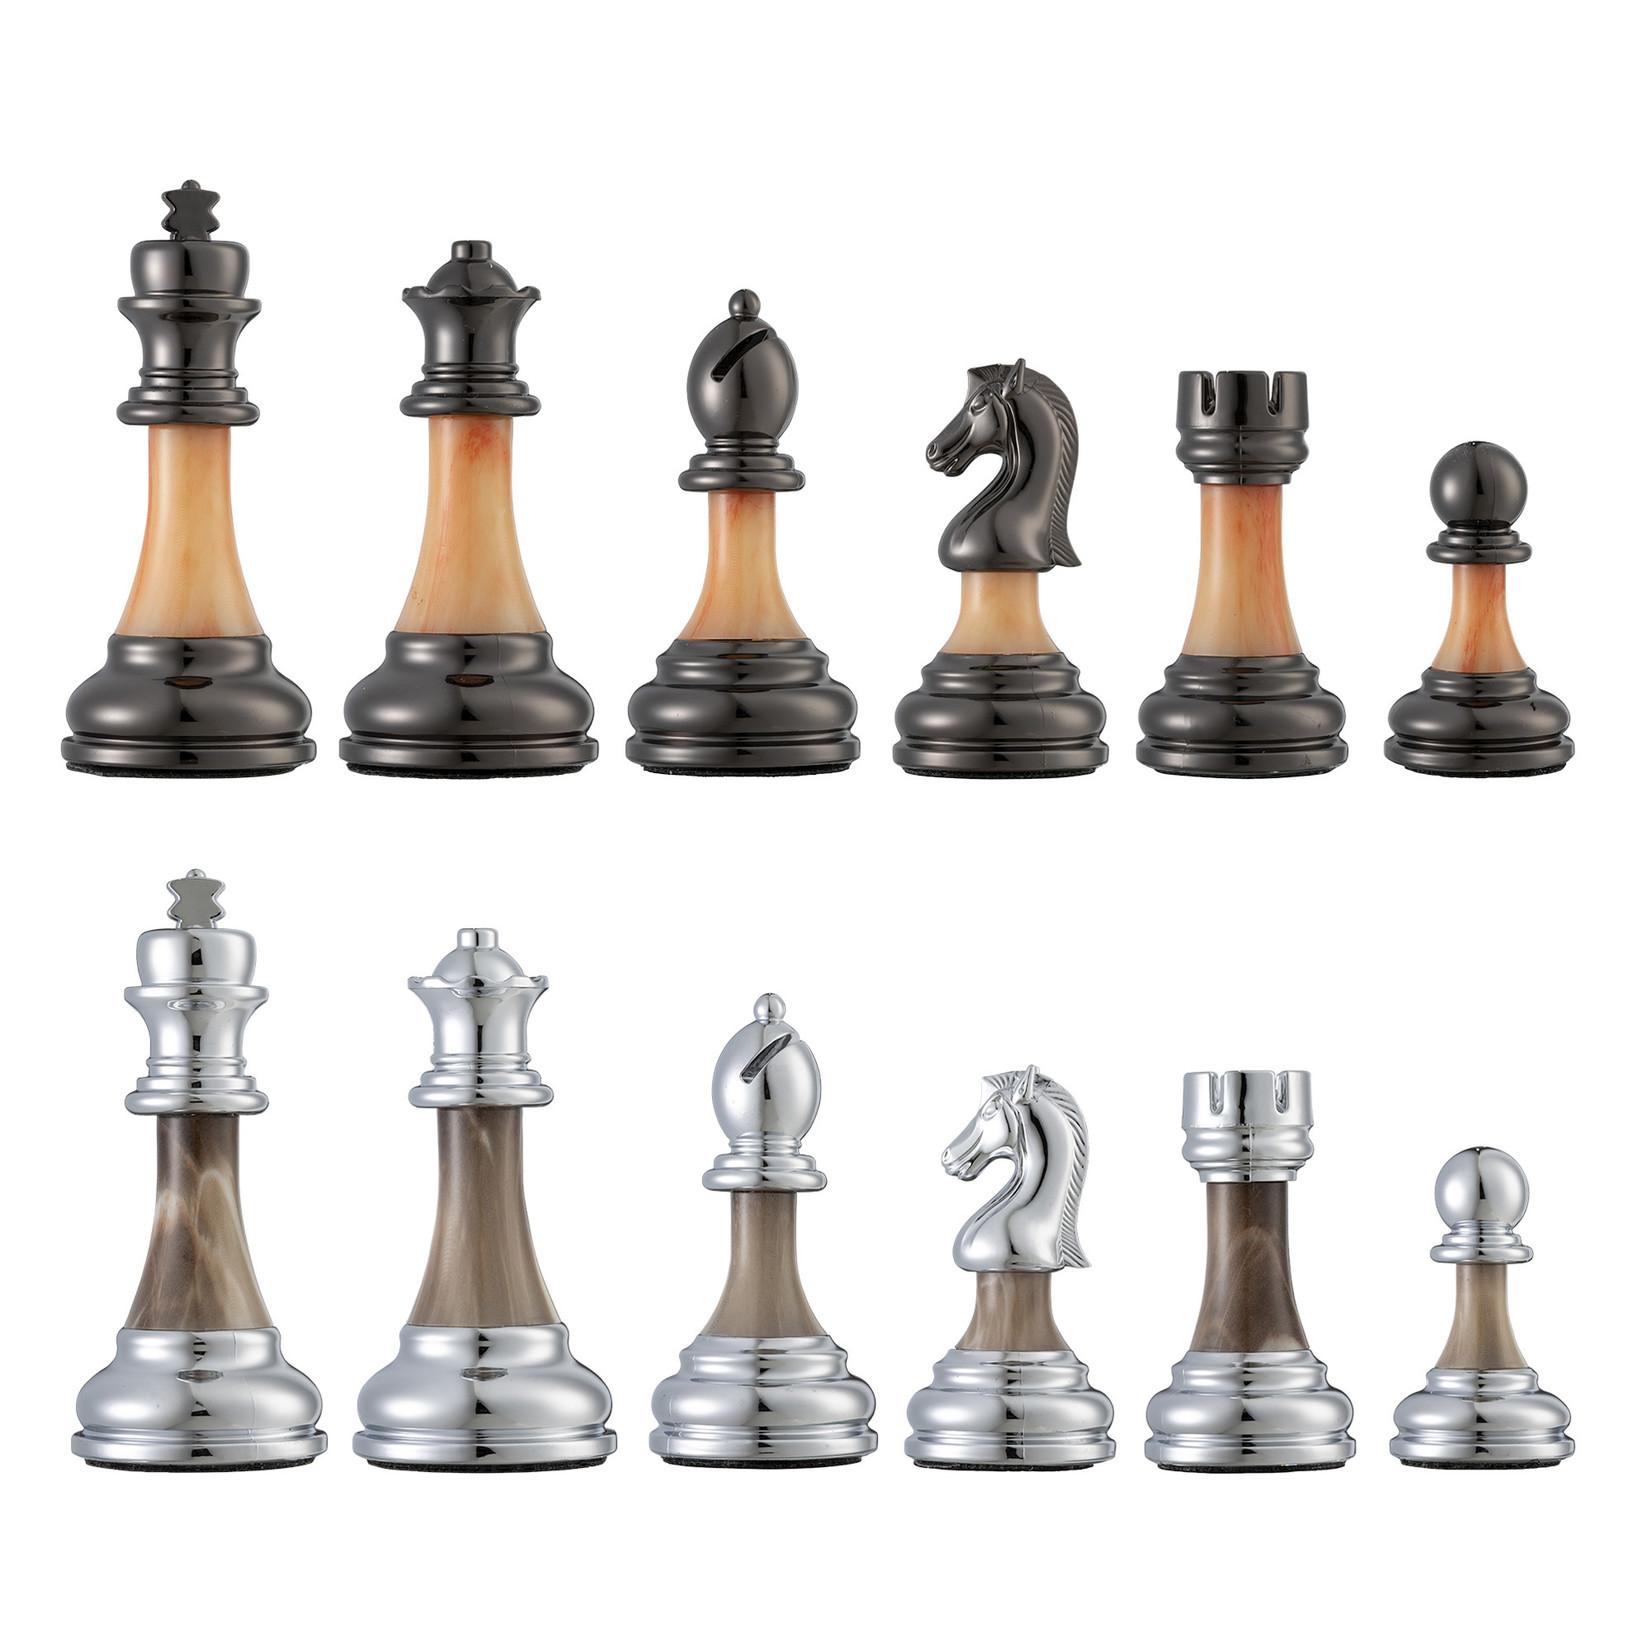 Bobby Fischer Learn to Play Chess - Staunton Style Chess Pieces